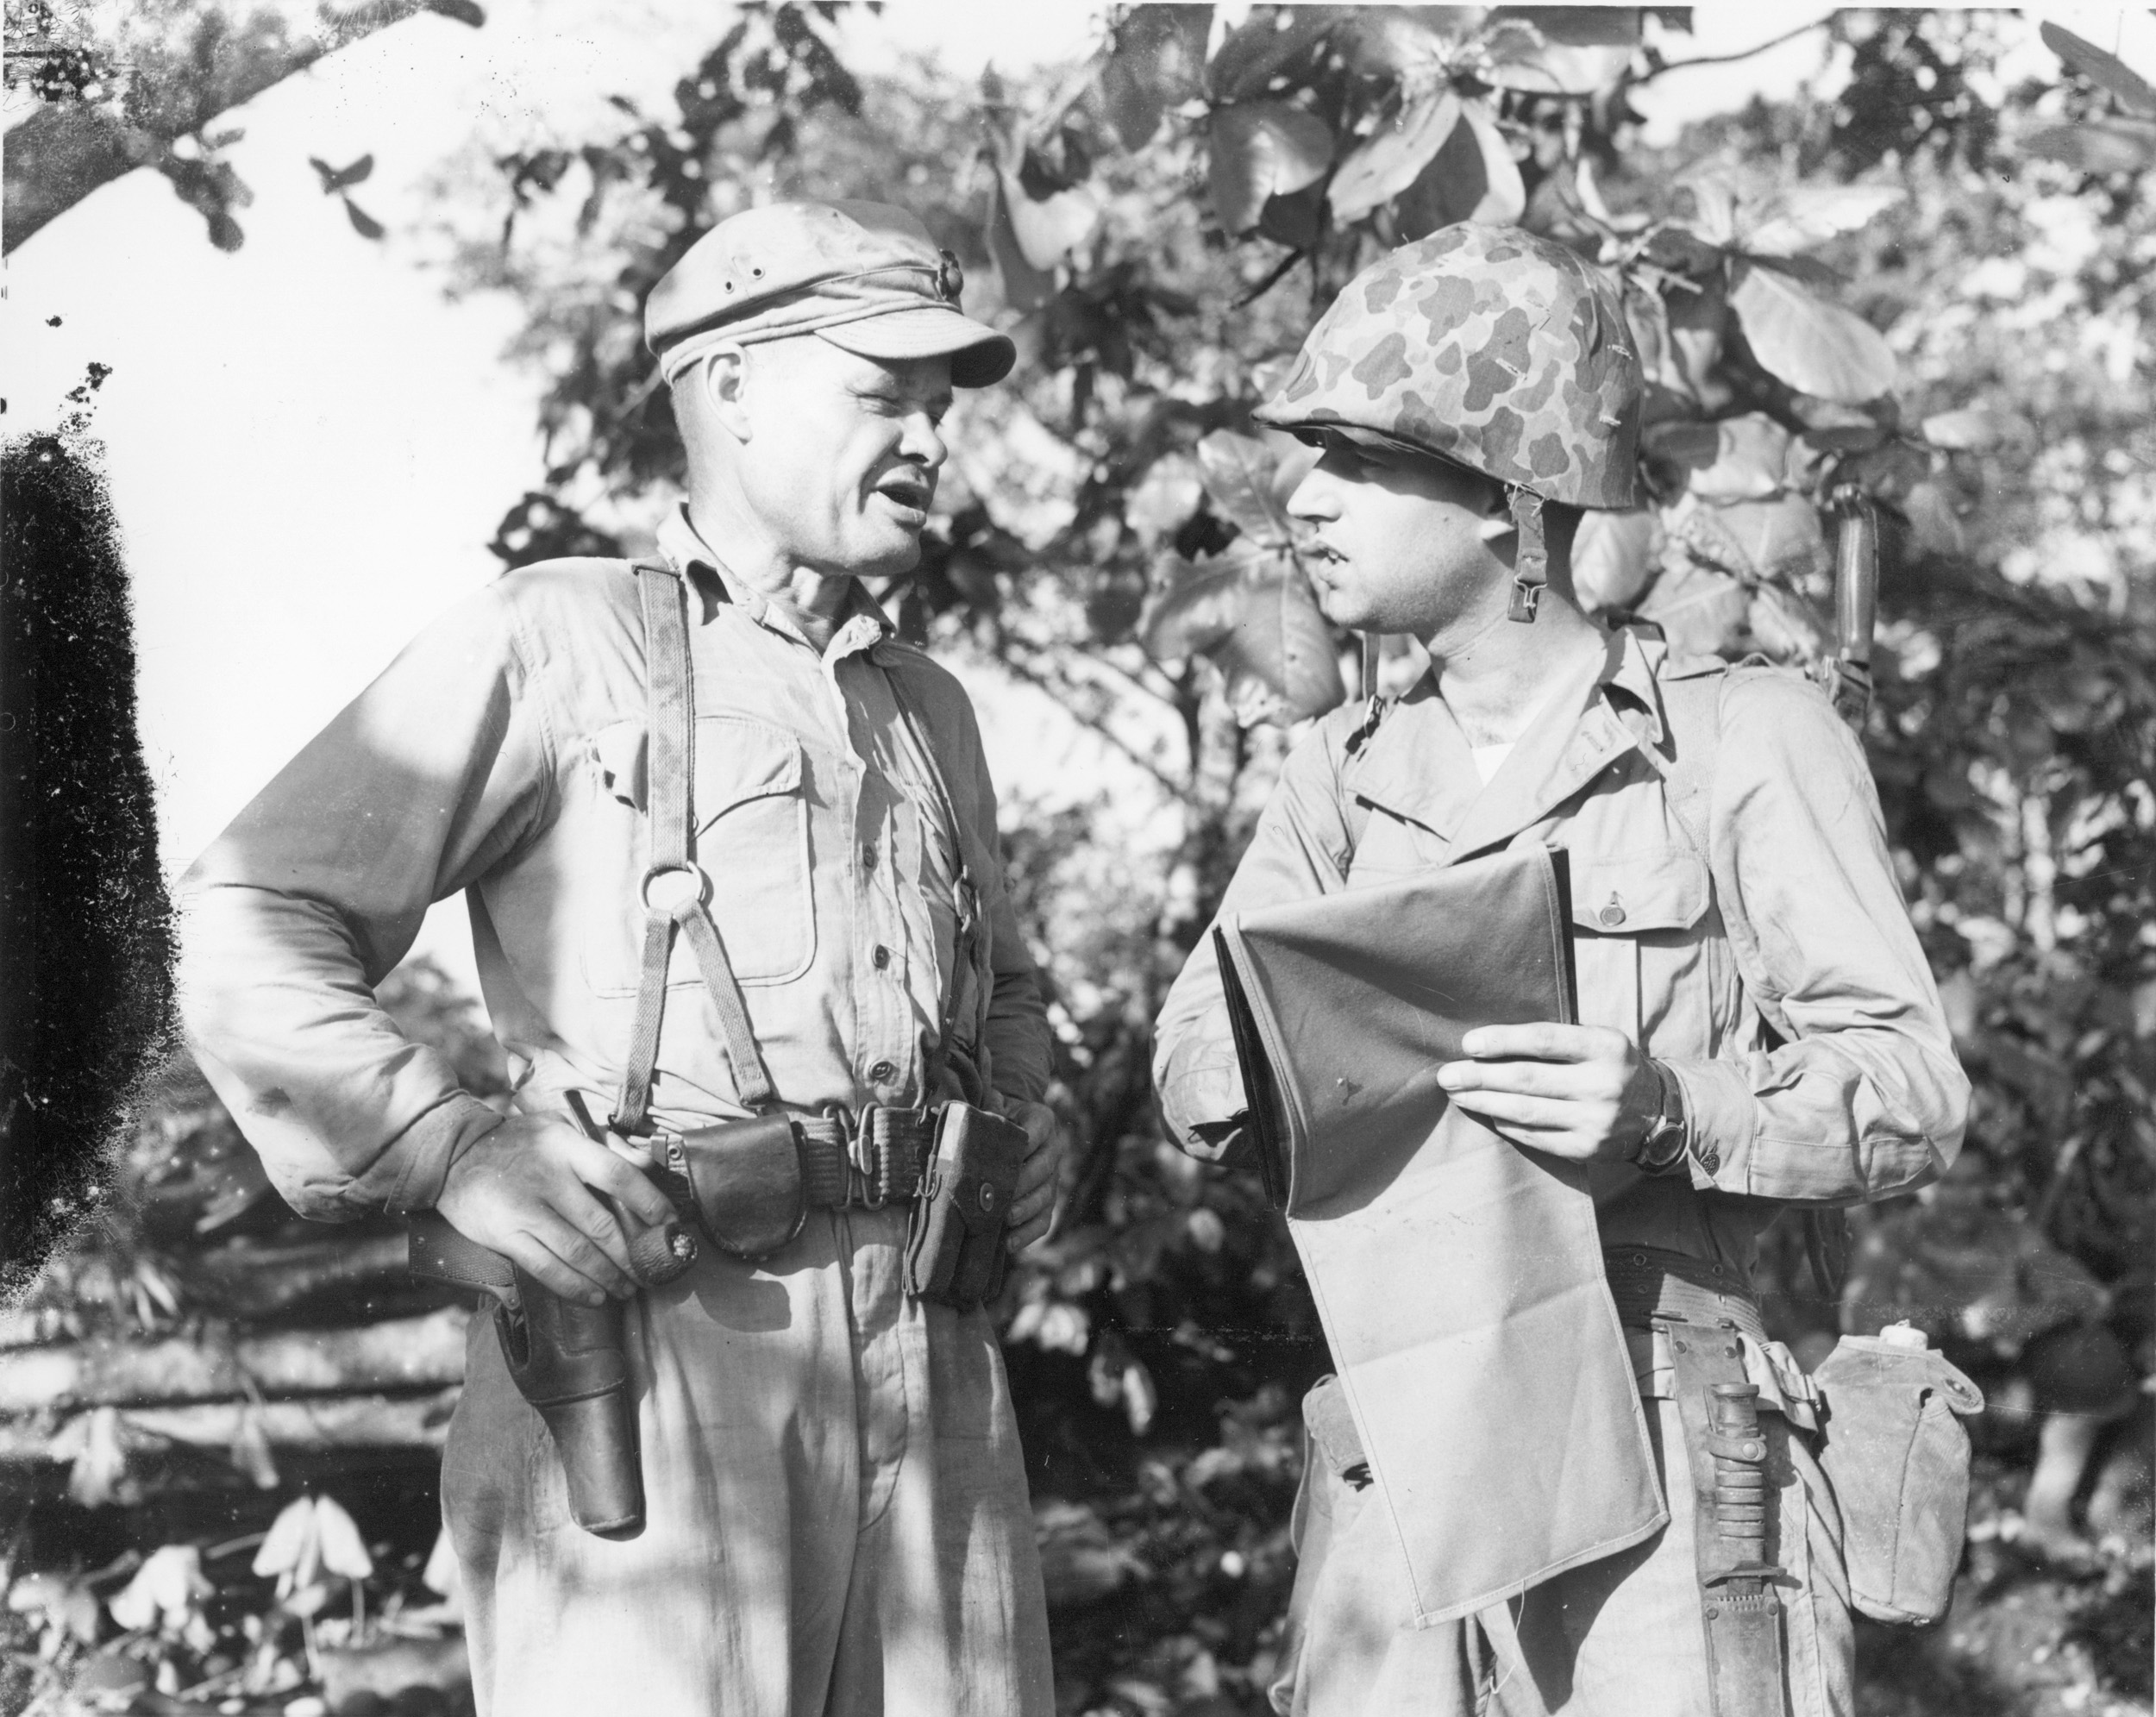 An ever-present figure near the front line, Chesty Puller (left) discusses troop dispositions with another officer.